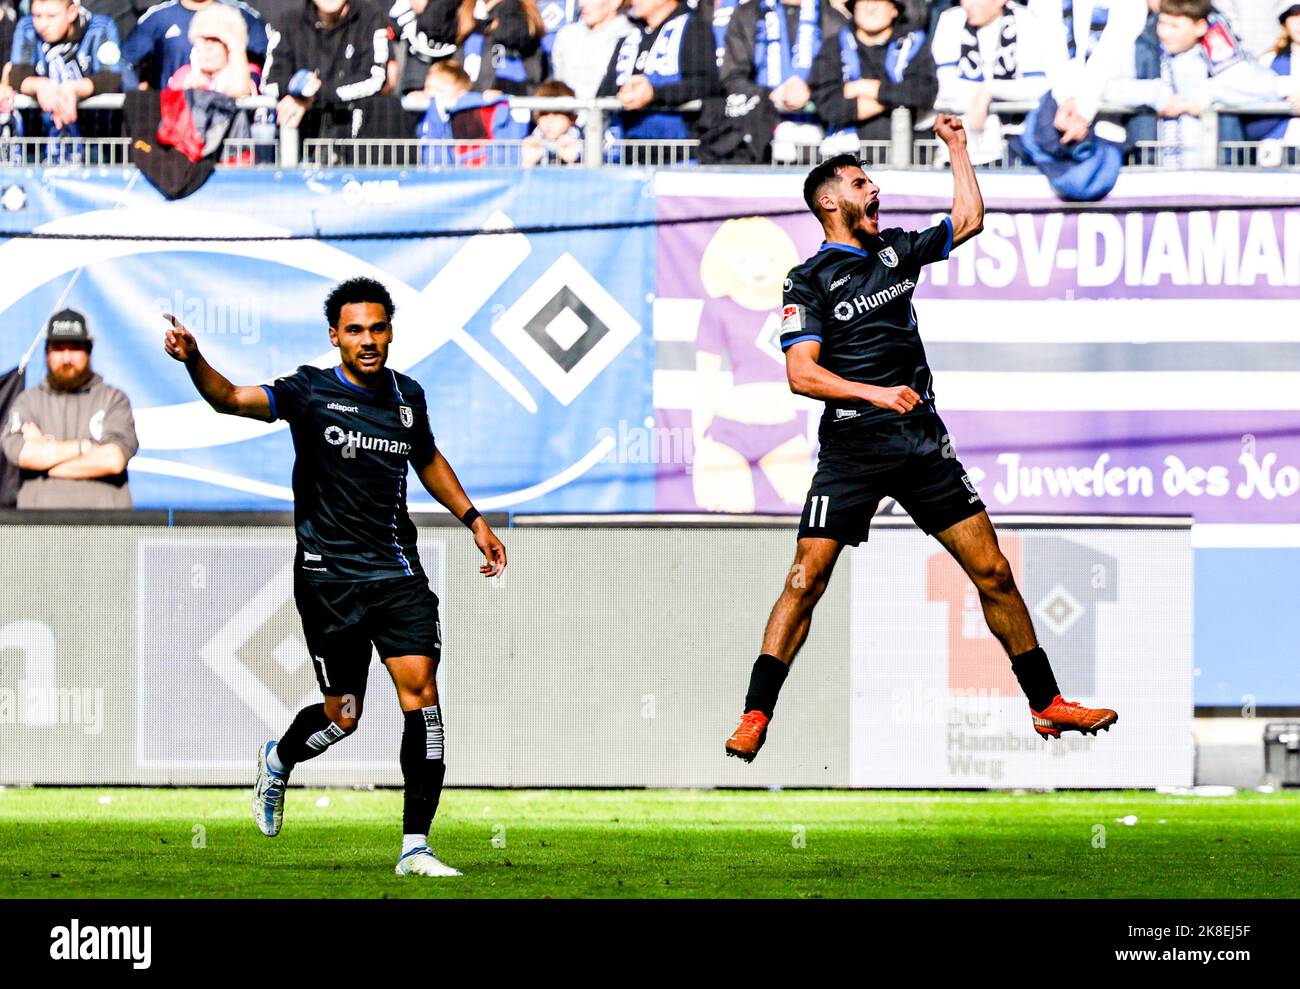 Hamburg, Germany. 23rd Oct, 2022. Soccer: 2nd Bundesliga, Hamburger SV - 1. FC Magdeburg, Matchday 13, Volksparkstadion. Magdeburg's Herbert Bockhorn (l) and Magdeburg's Mohammed El Hankouri celebrate the 0:1 goal. Credit: Axel Heimken/dpa - IMPORTANT NOTE: In accordance with the requirements of the DFL Deutsche Fußball Liga and the DFB Deutscher Fußball-Bund, it is prohibited to use or have used photographs taken in the stadium and/or of the match in the form of sequence pictures and/or video-like photo series./dpa/Alamy Live News Stock Photo